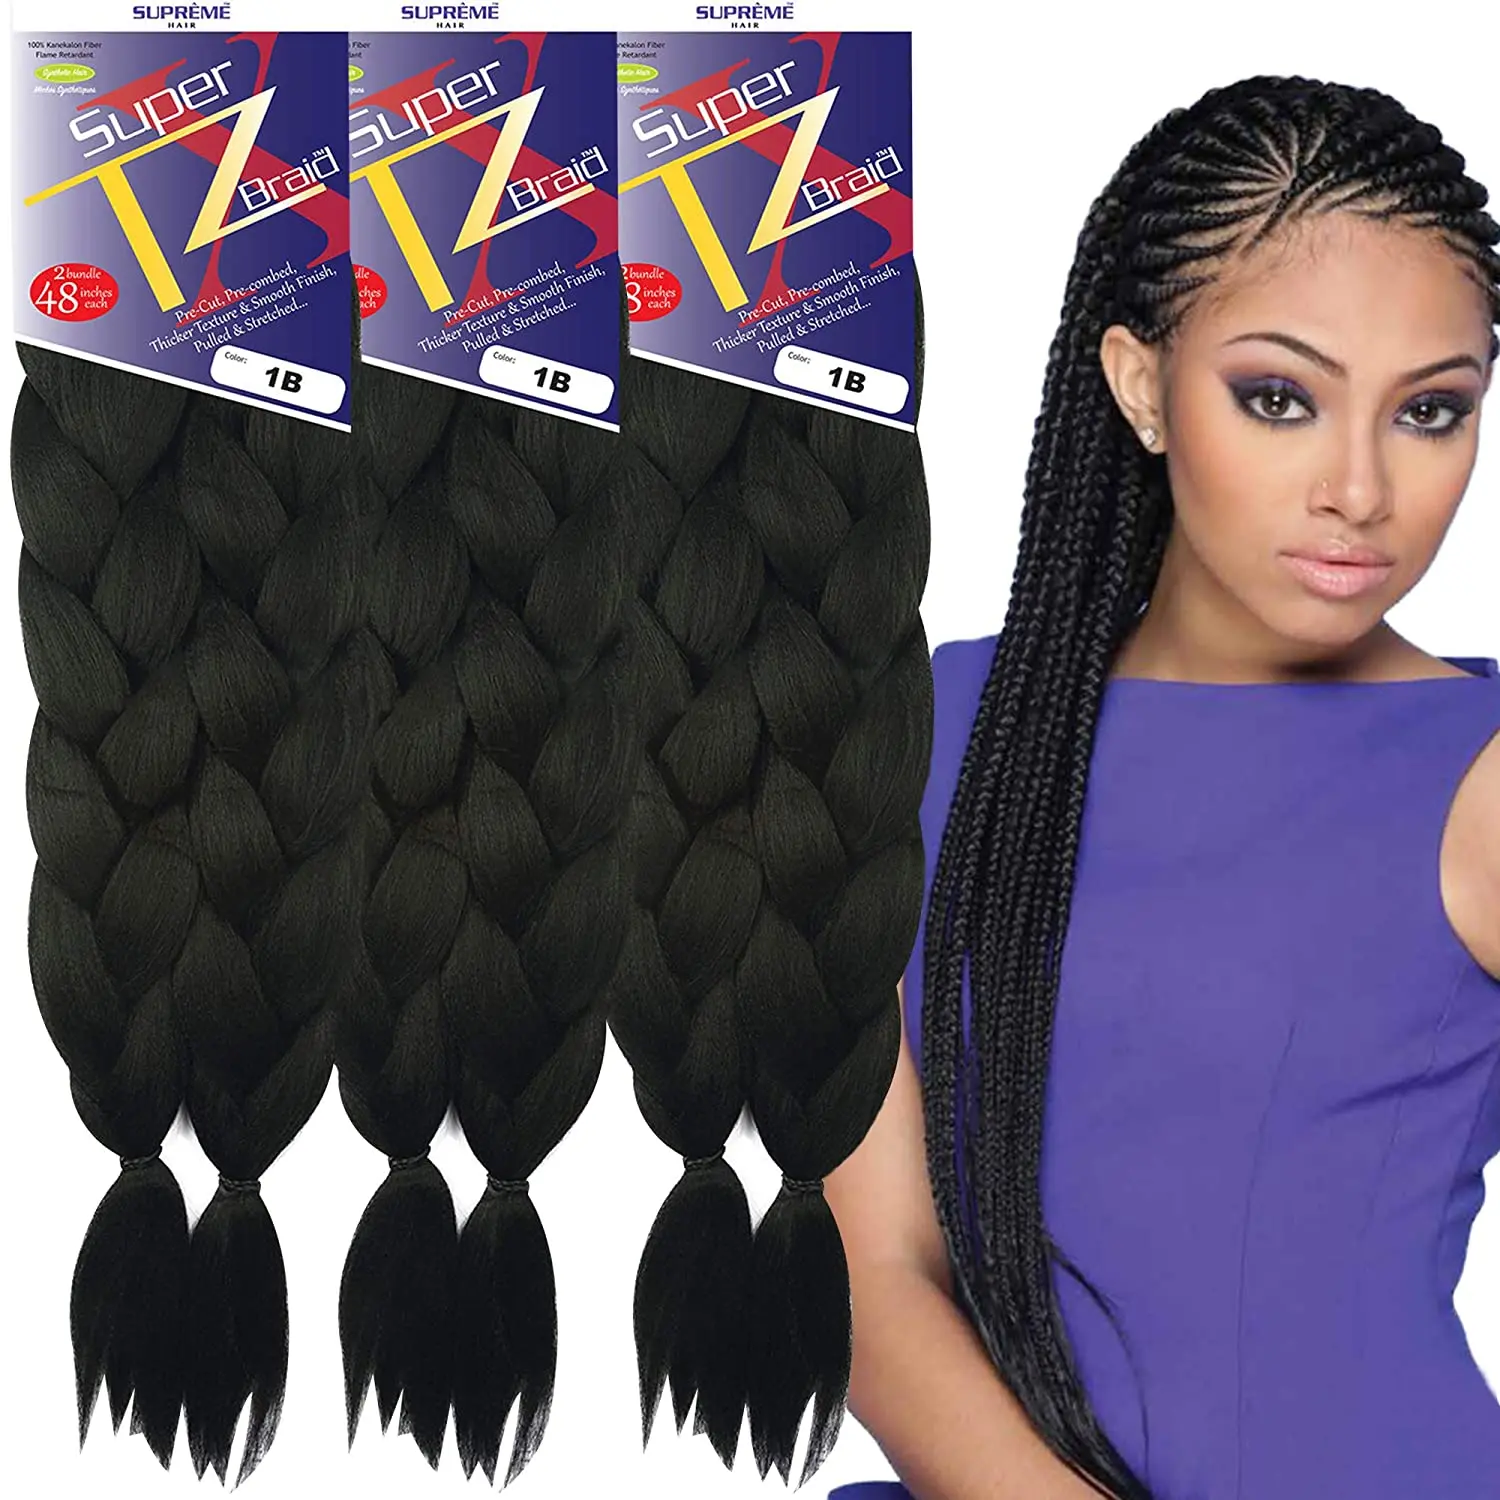 

Hot selling Synthetic Jumbo ez Braids hot water setting ombre color yaki expression private label pre stretched braiding hair